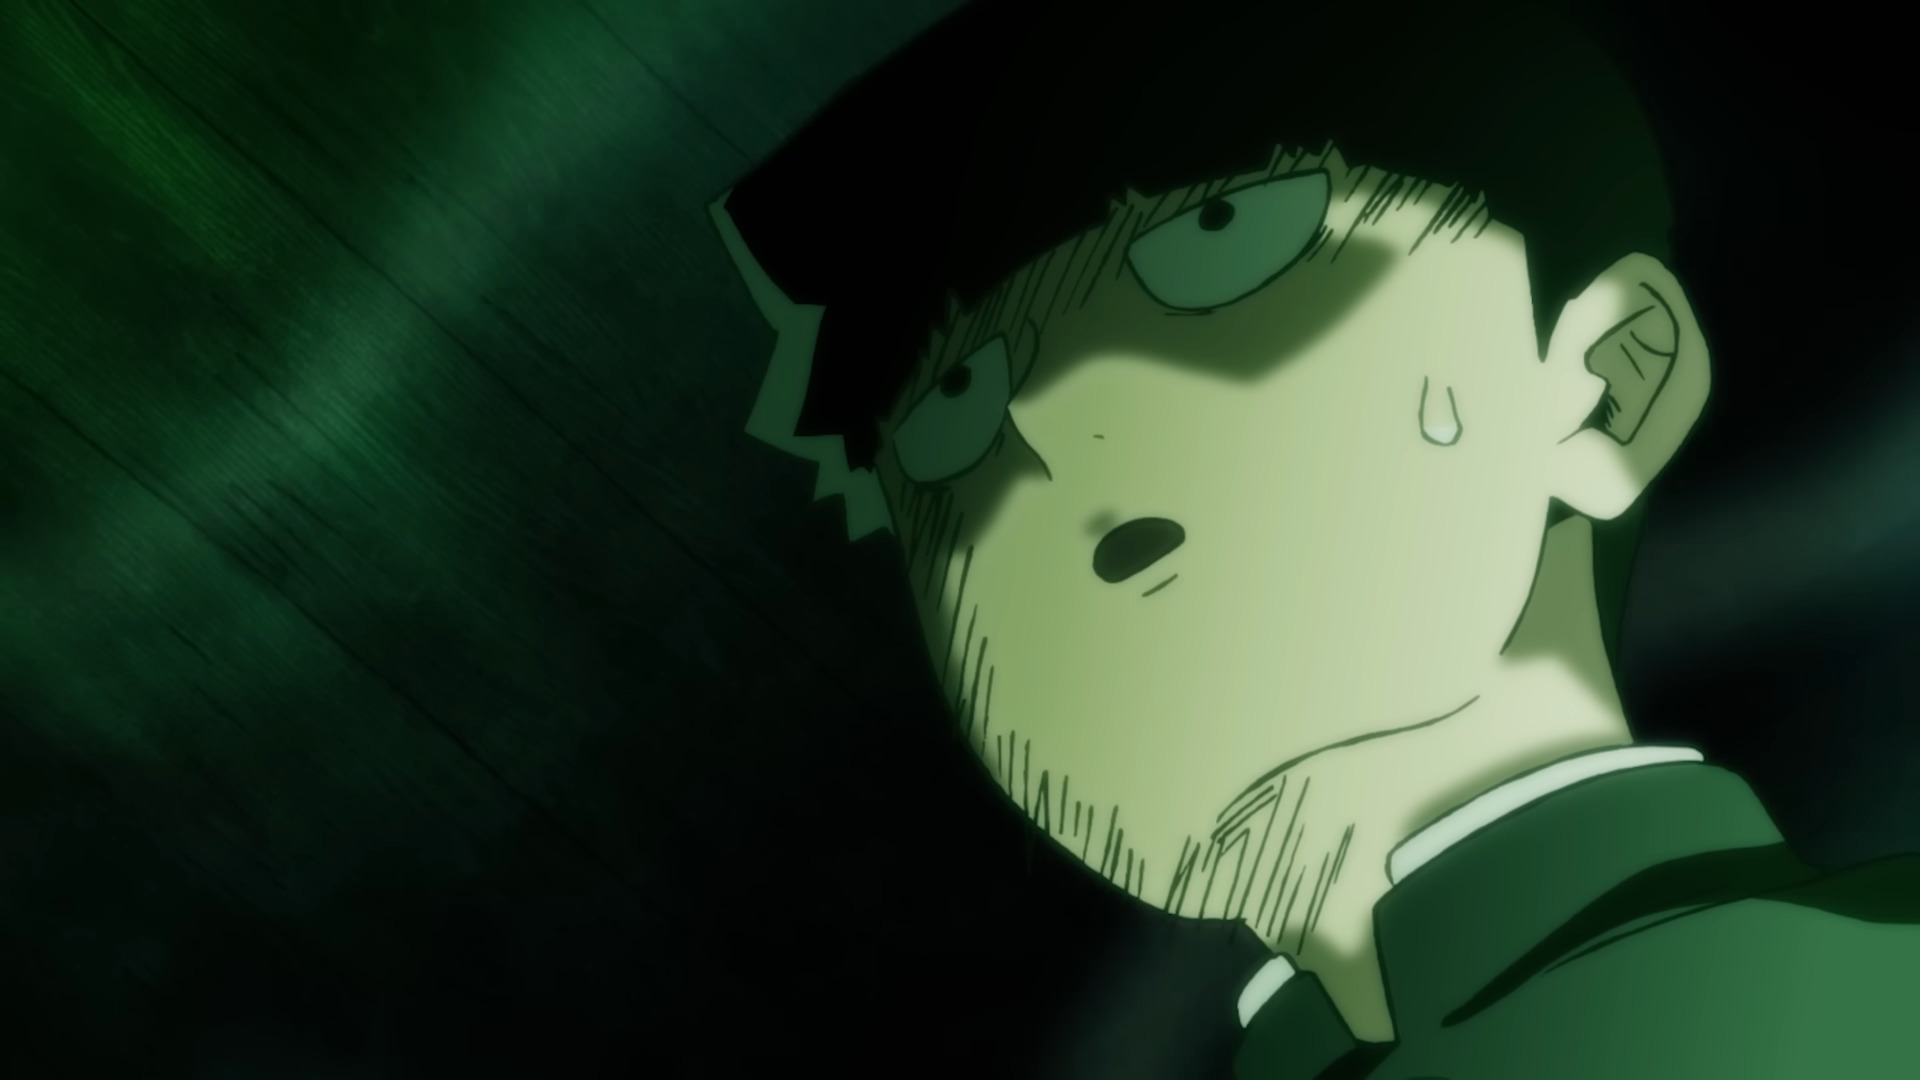 Mob Psycho 100 Season 3 Dub Moving Forward Without Mob Voice Actor